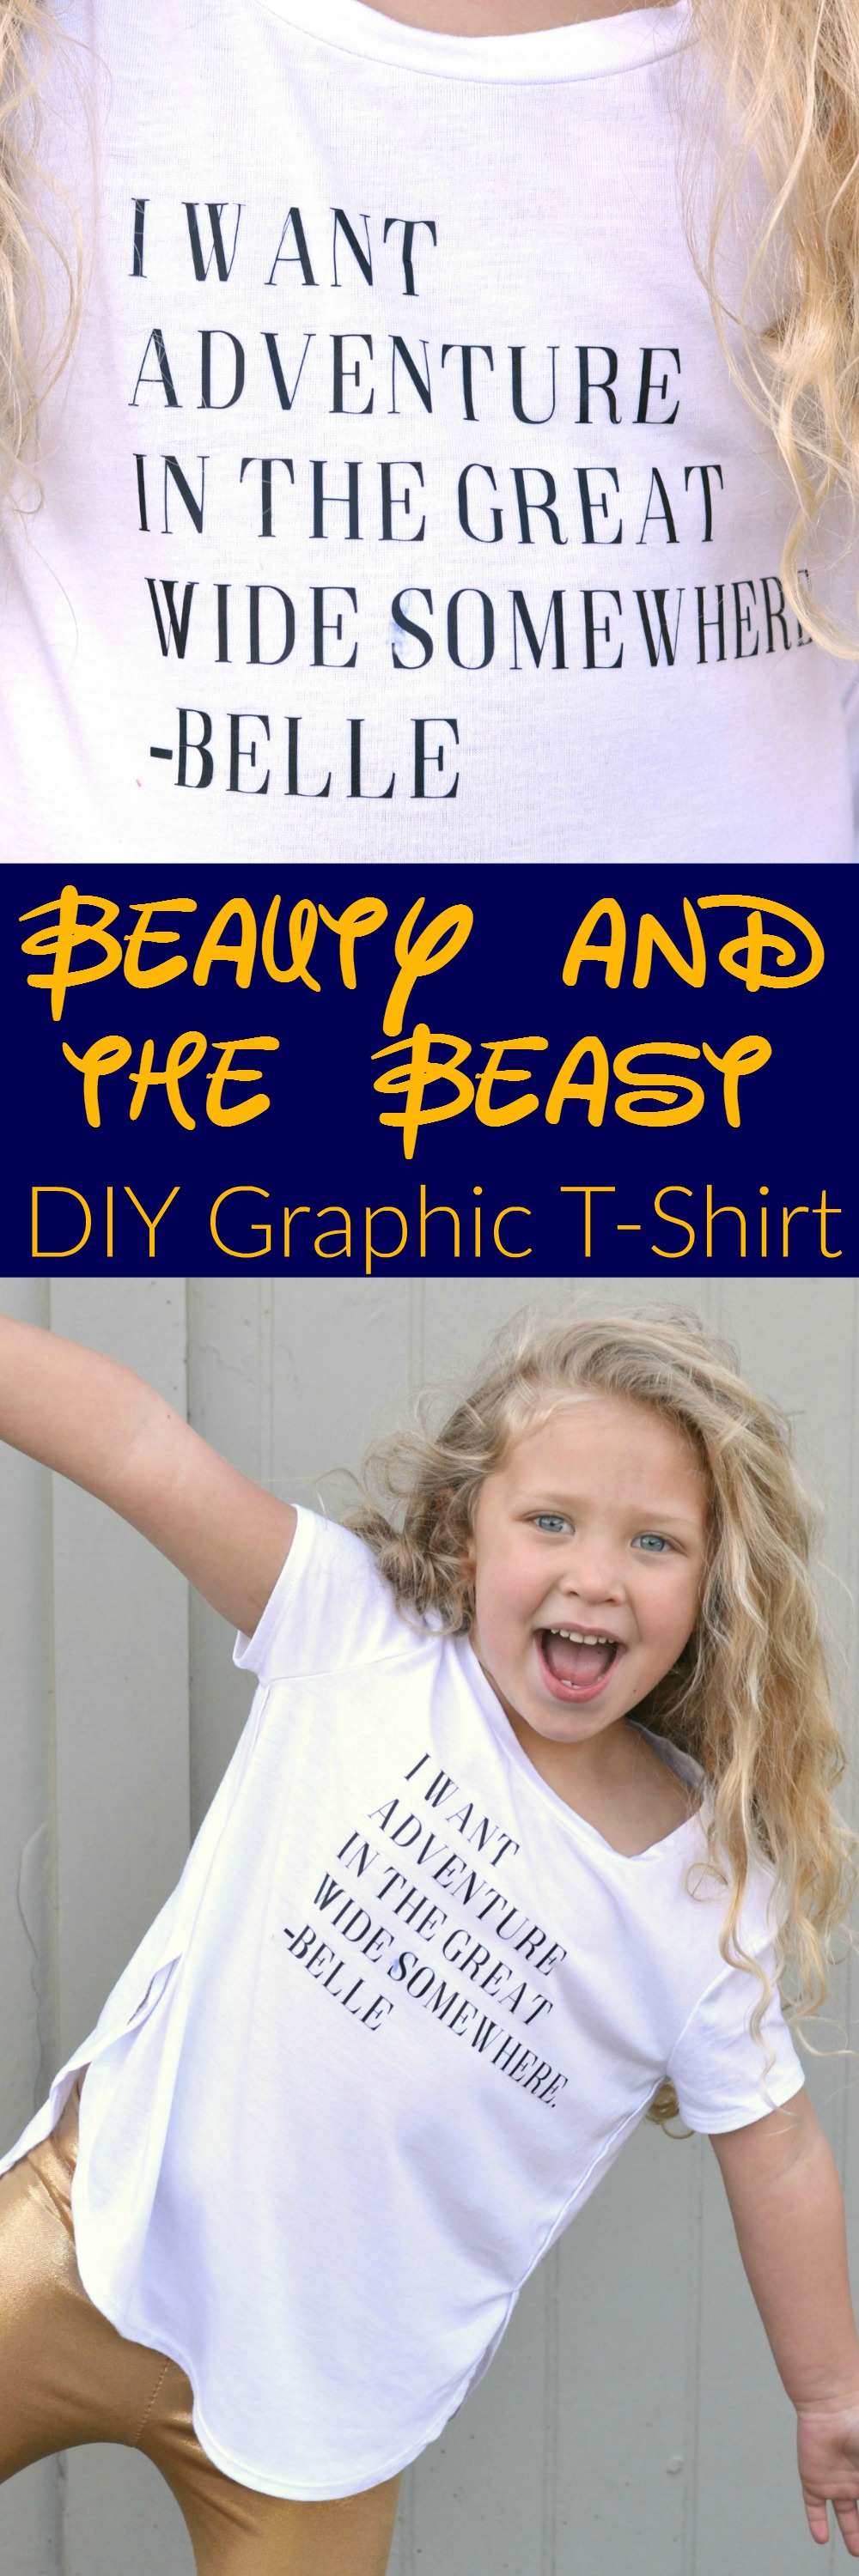 Disney Beauty and the Beast DIY Graphic T-shirt